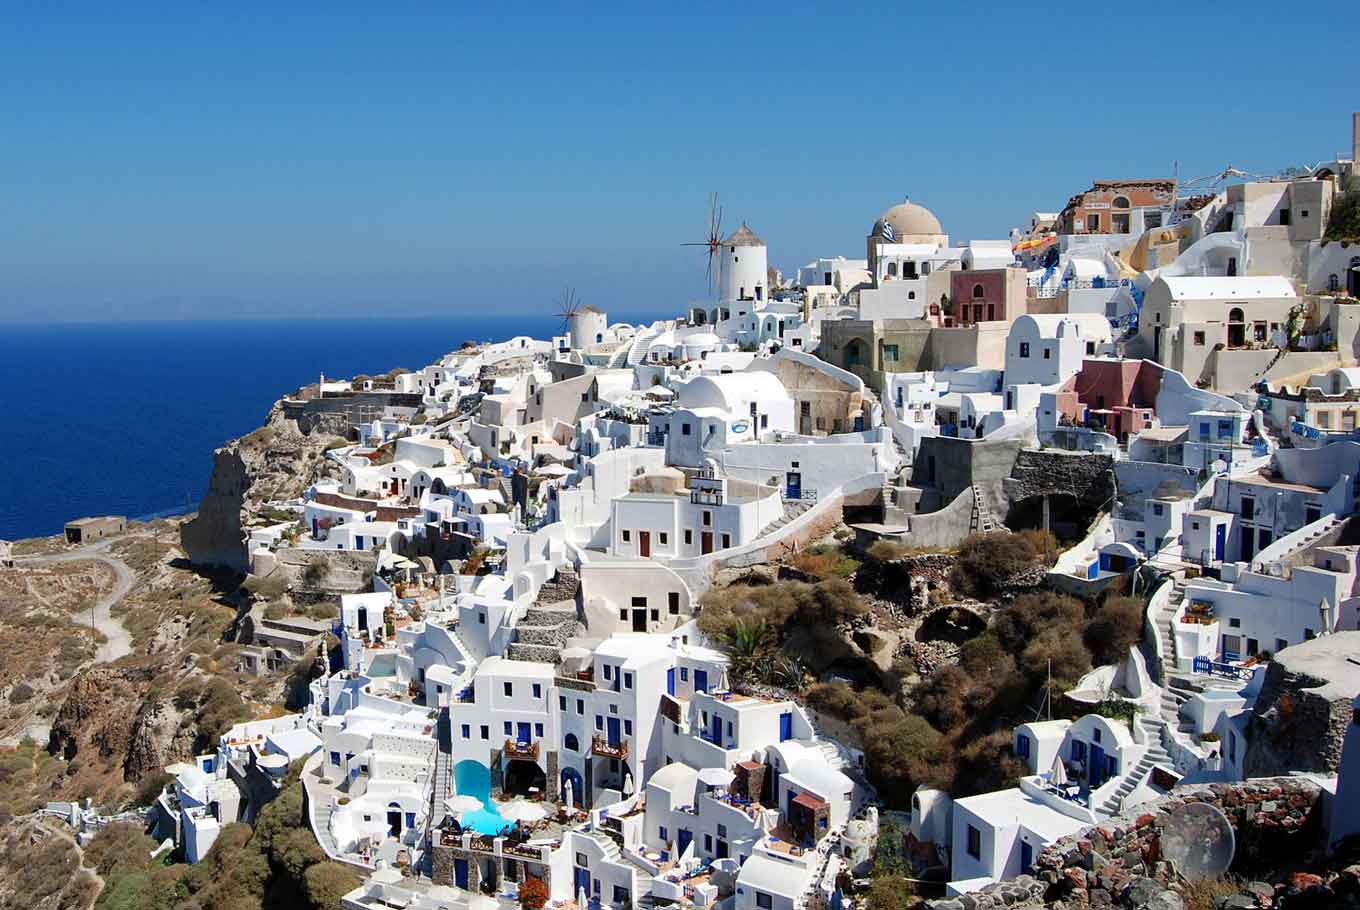 Aerial view of traditional architecture in Santorini, mostly whitewashed